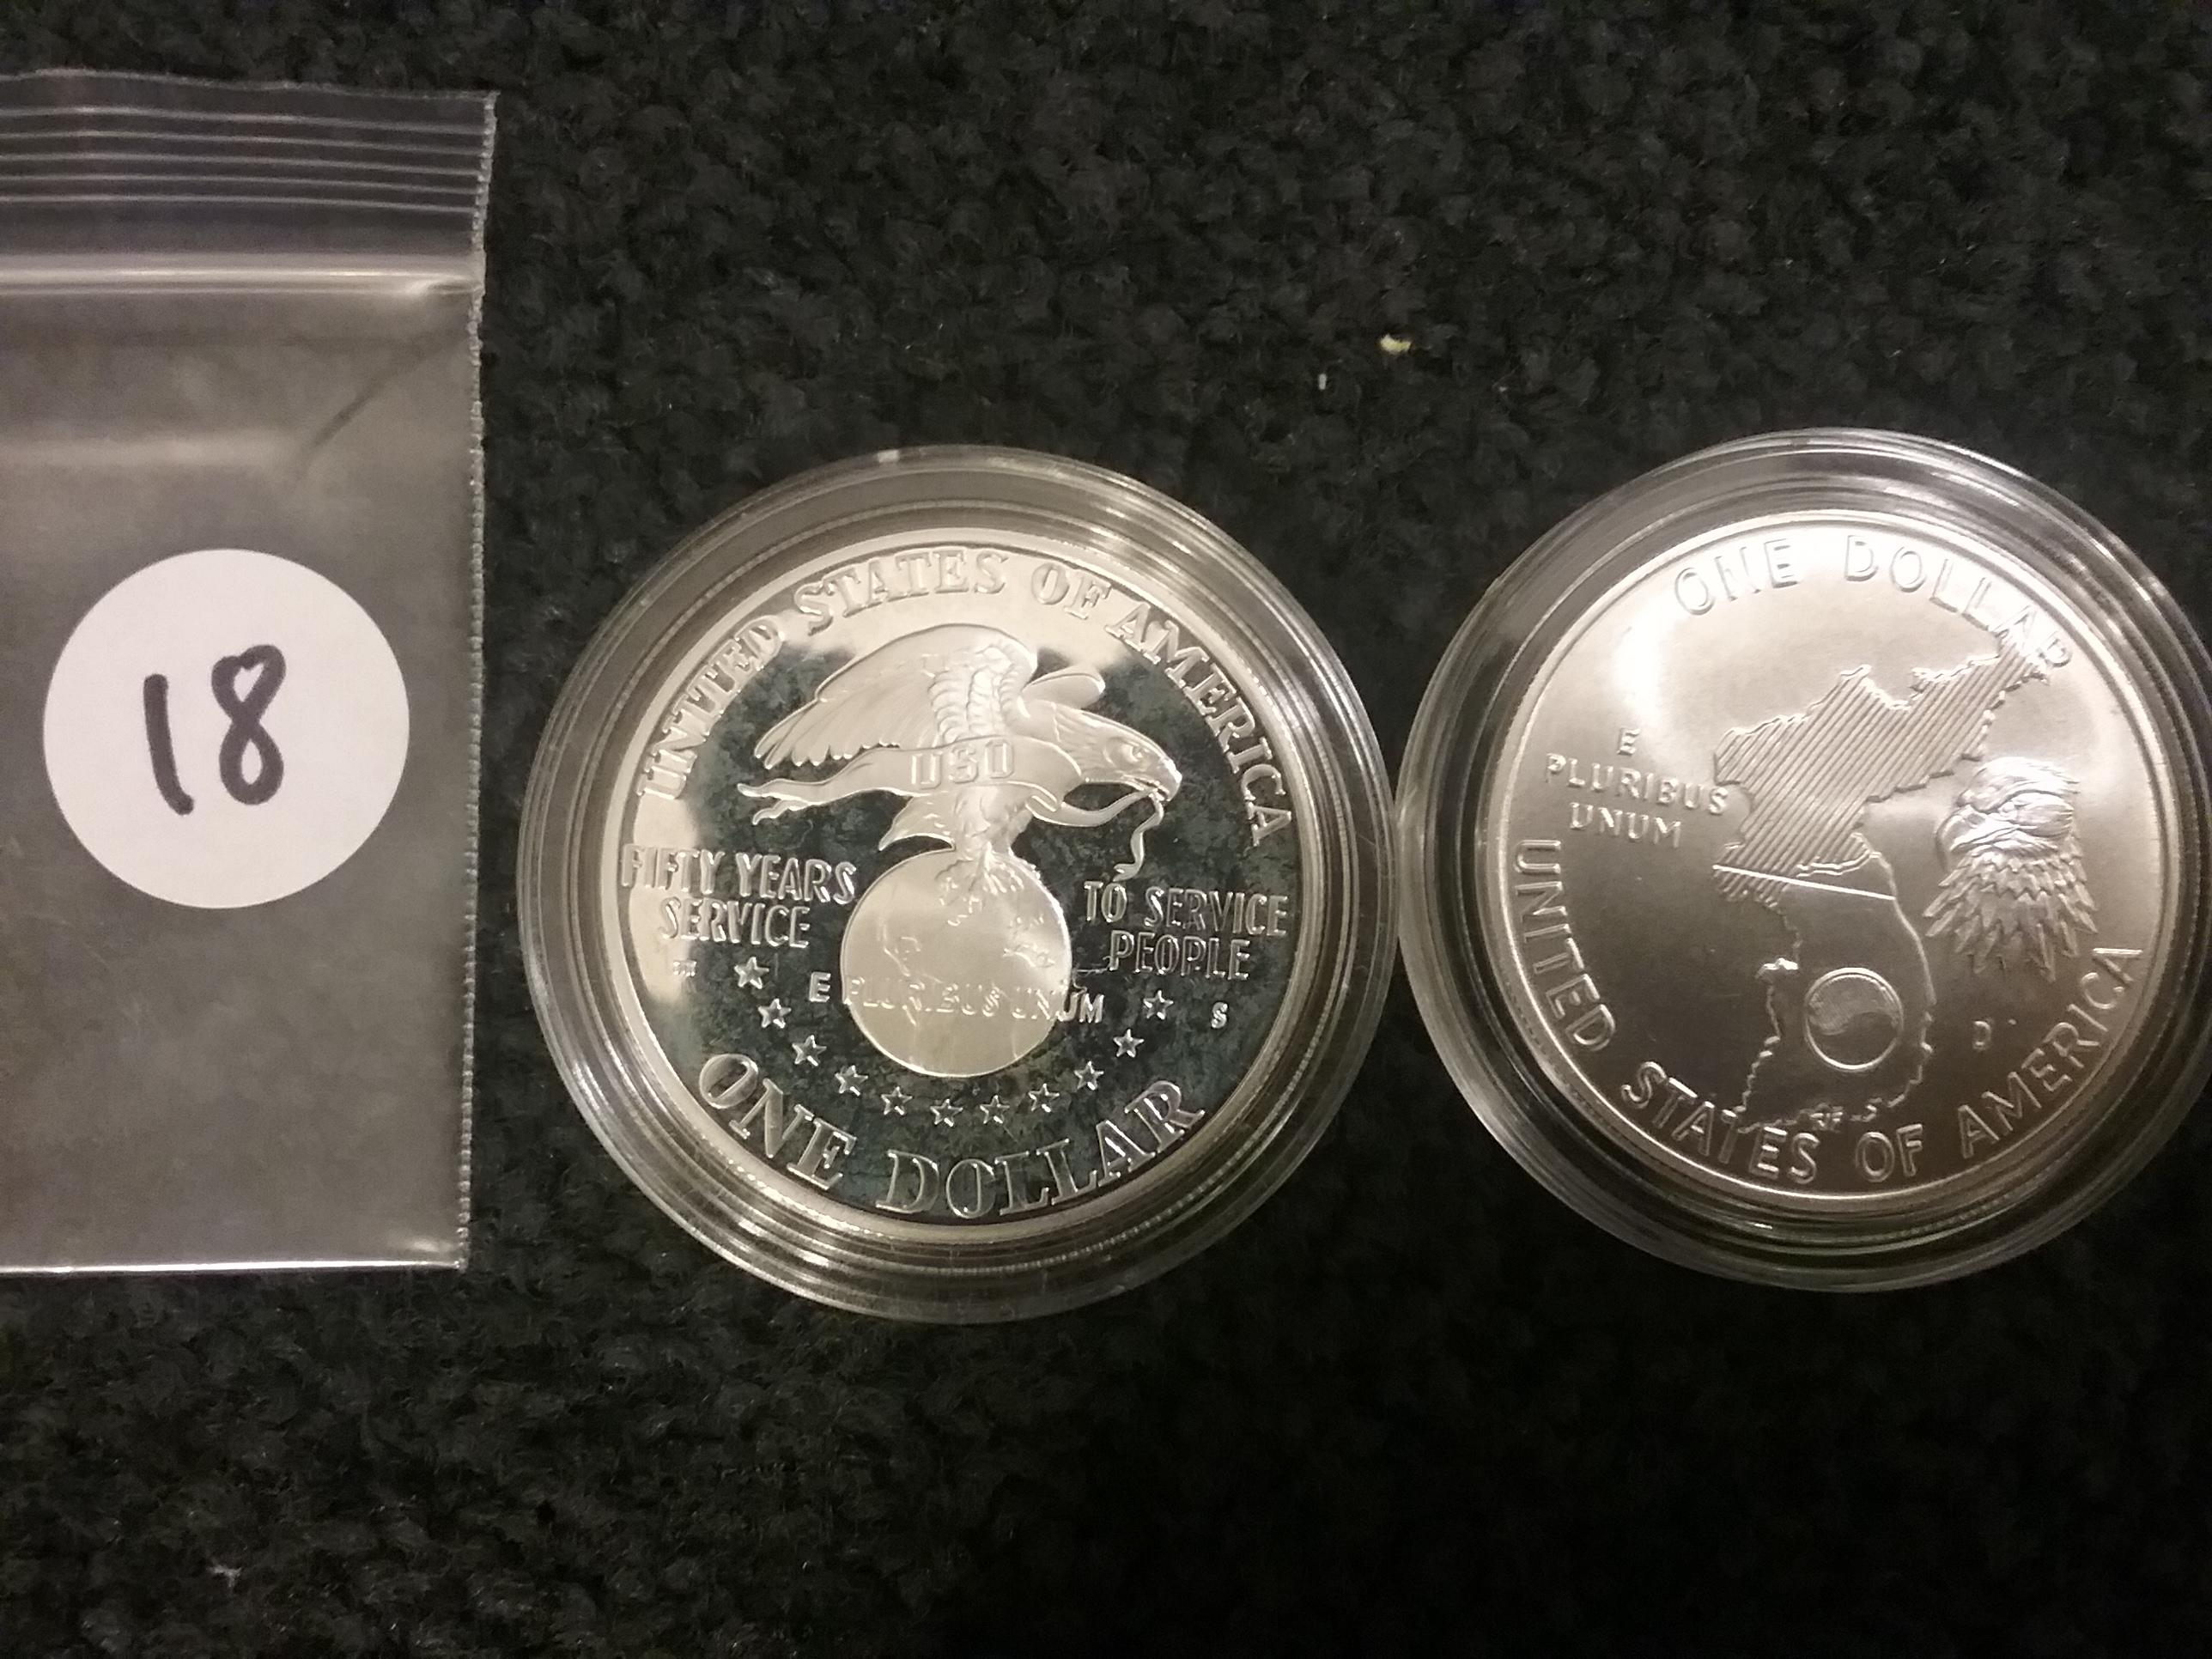 Two 1991 Silver Commemorative Dollars